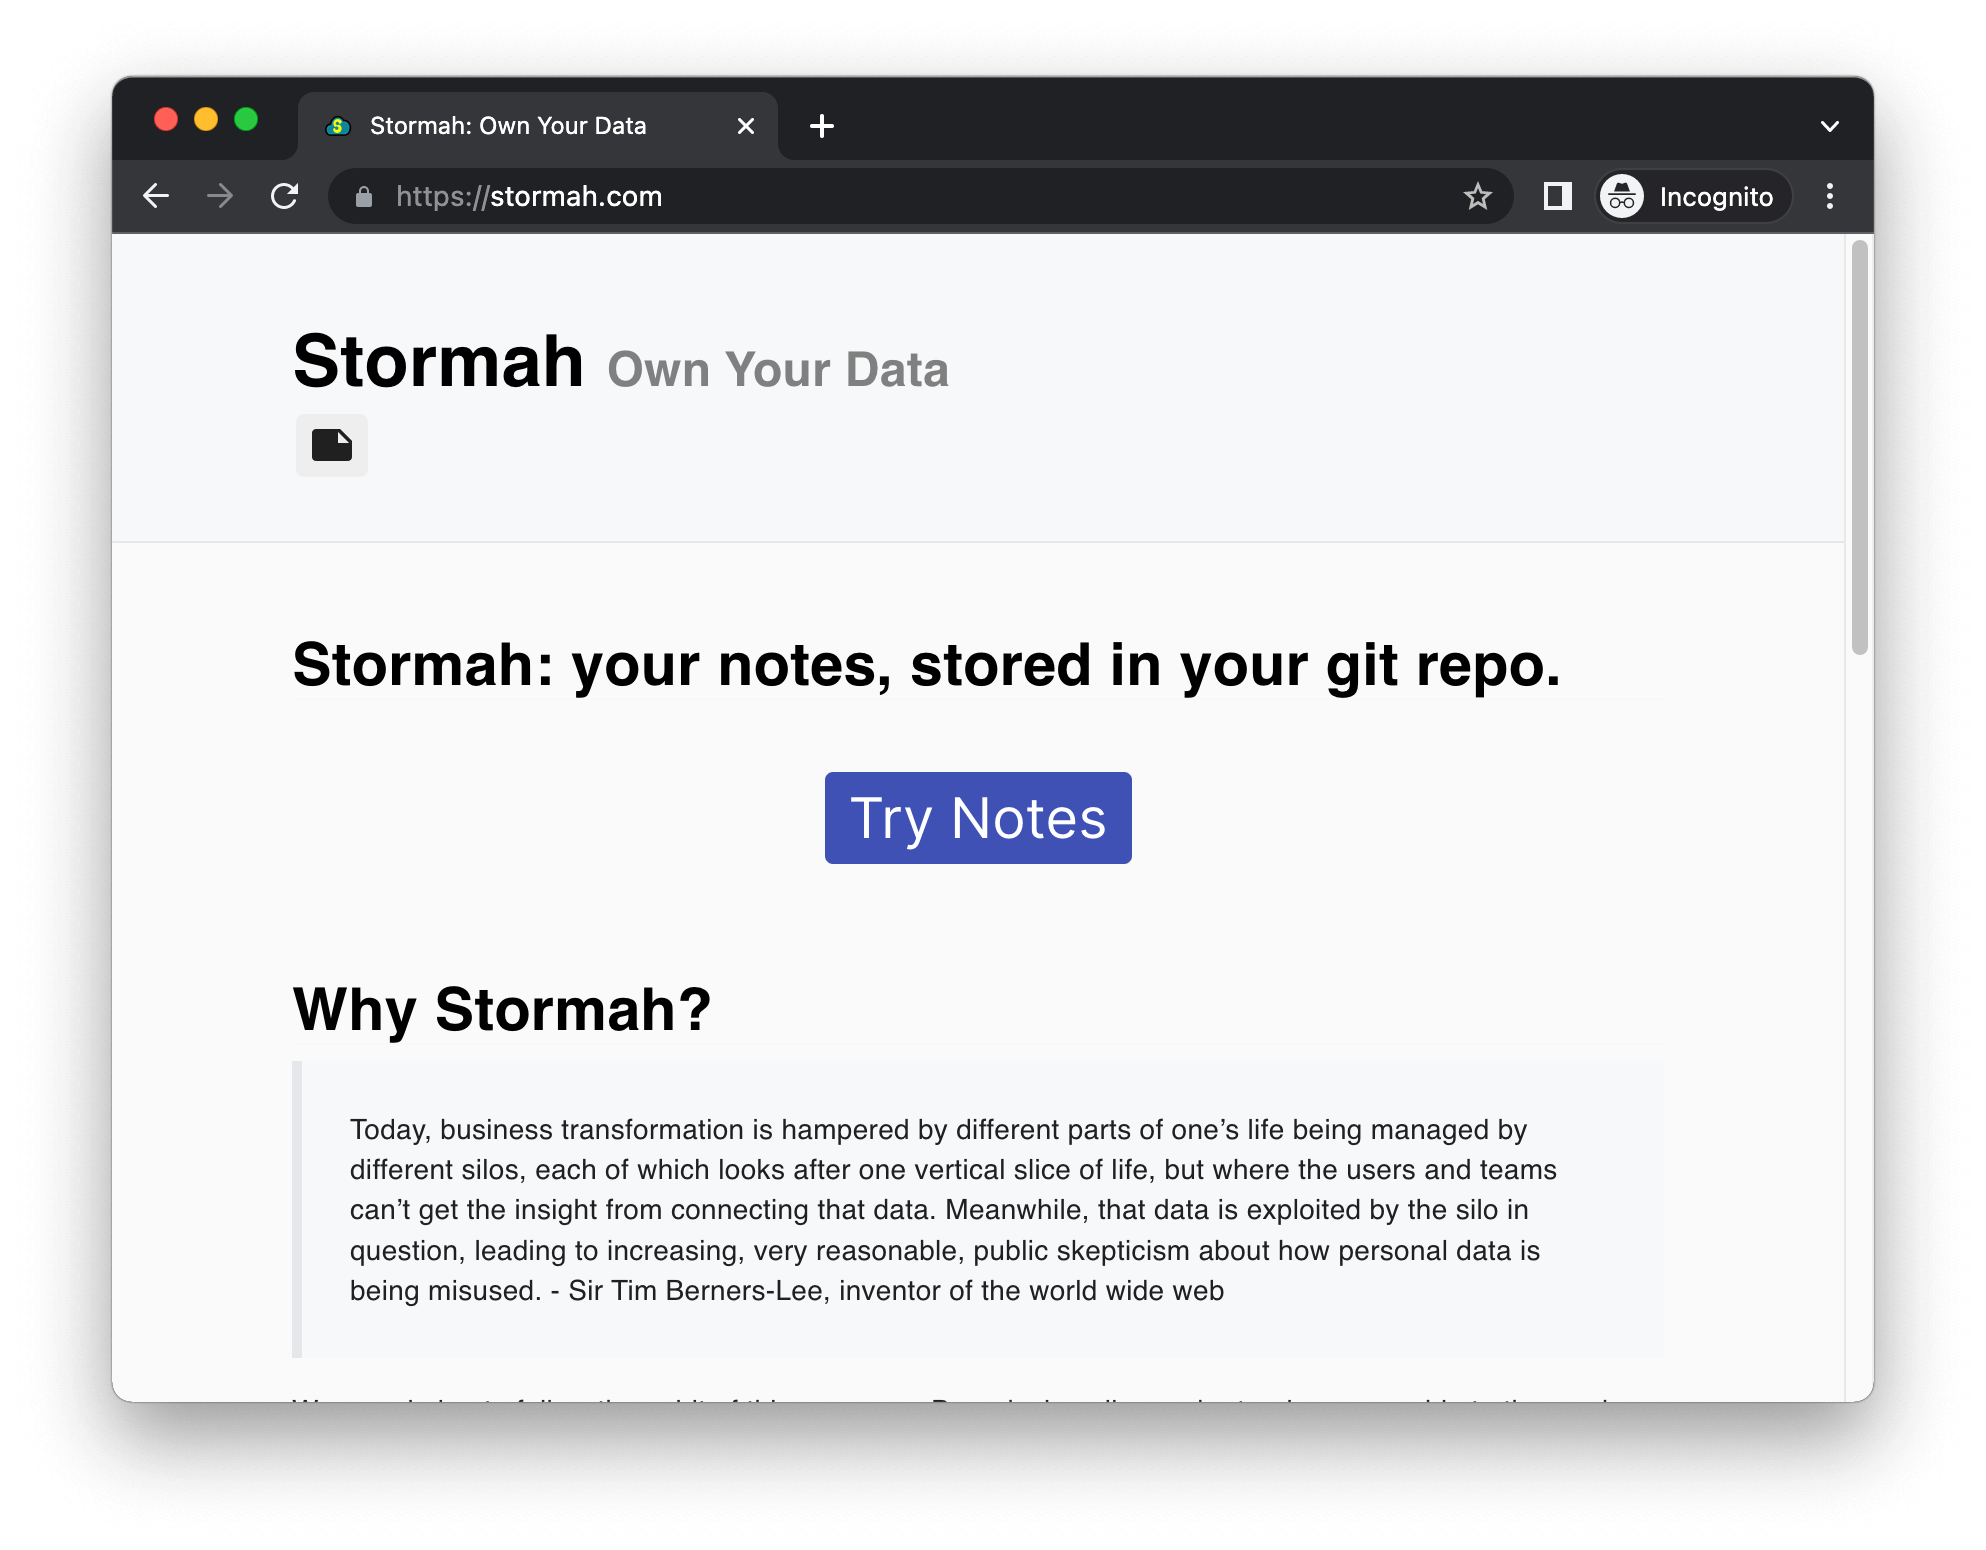 Stormah: Own Your Data